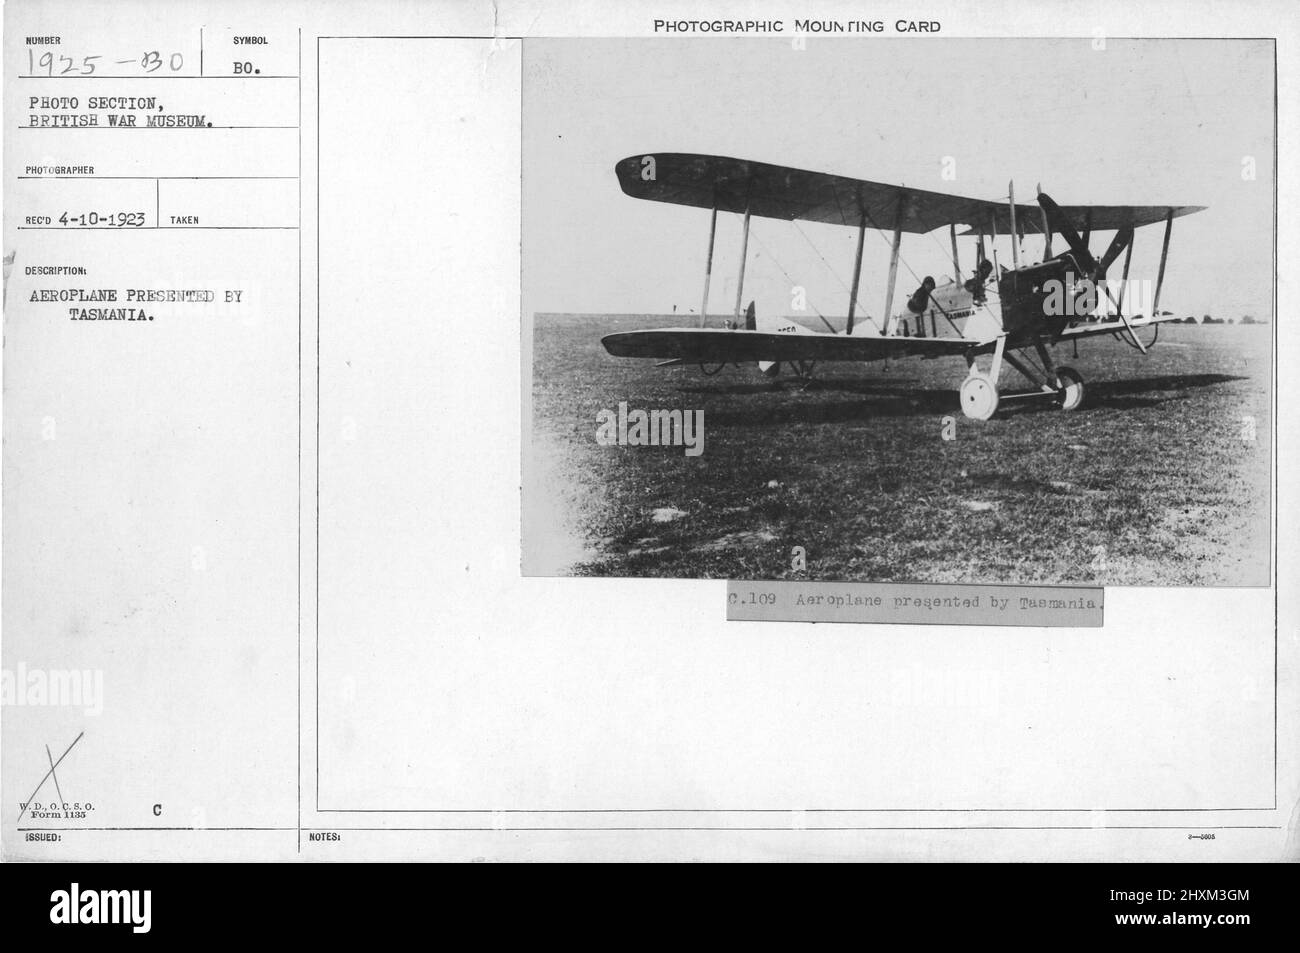 Aeroplane presented by Tasmania. Collection of World War I Photographs, 1914-1918 that depict the military activities of British and other nation's armed forces and personnel during World War I. Stock Photo